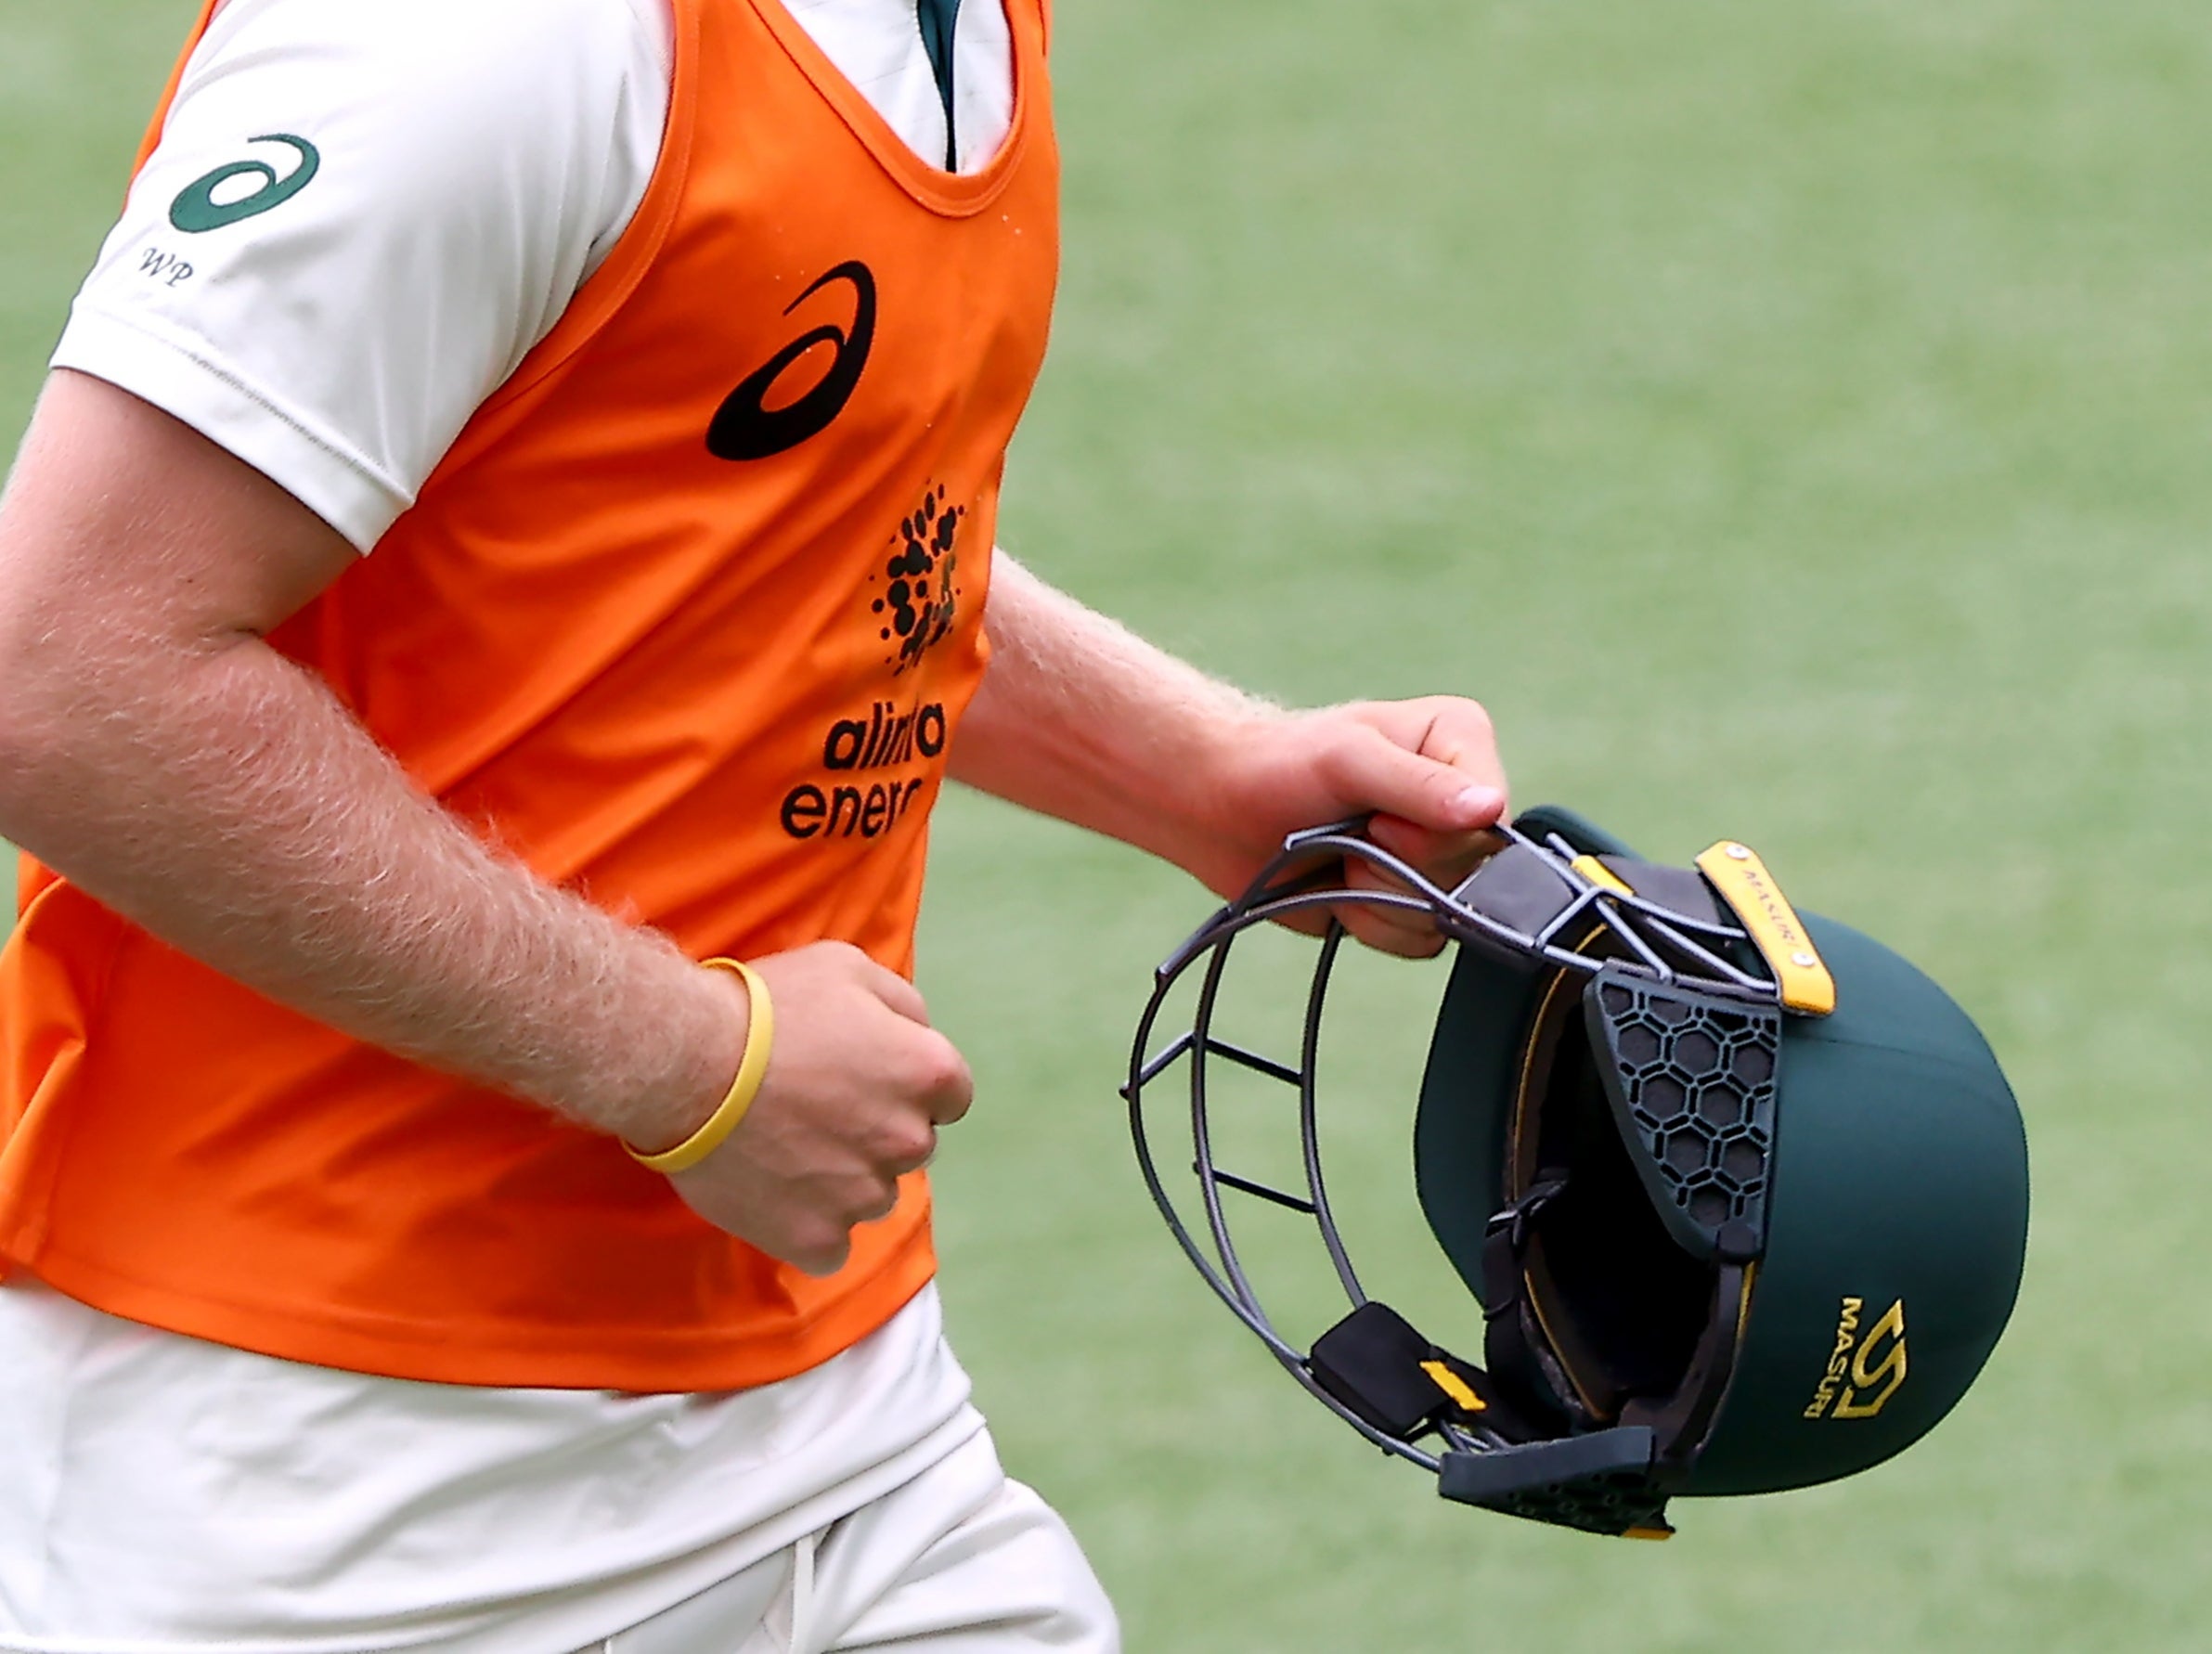 Helmets provide protection for batsmen but injuries can still occur